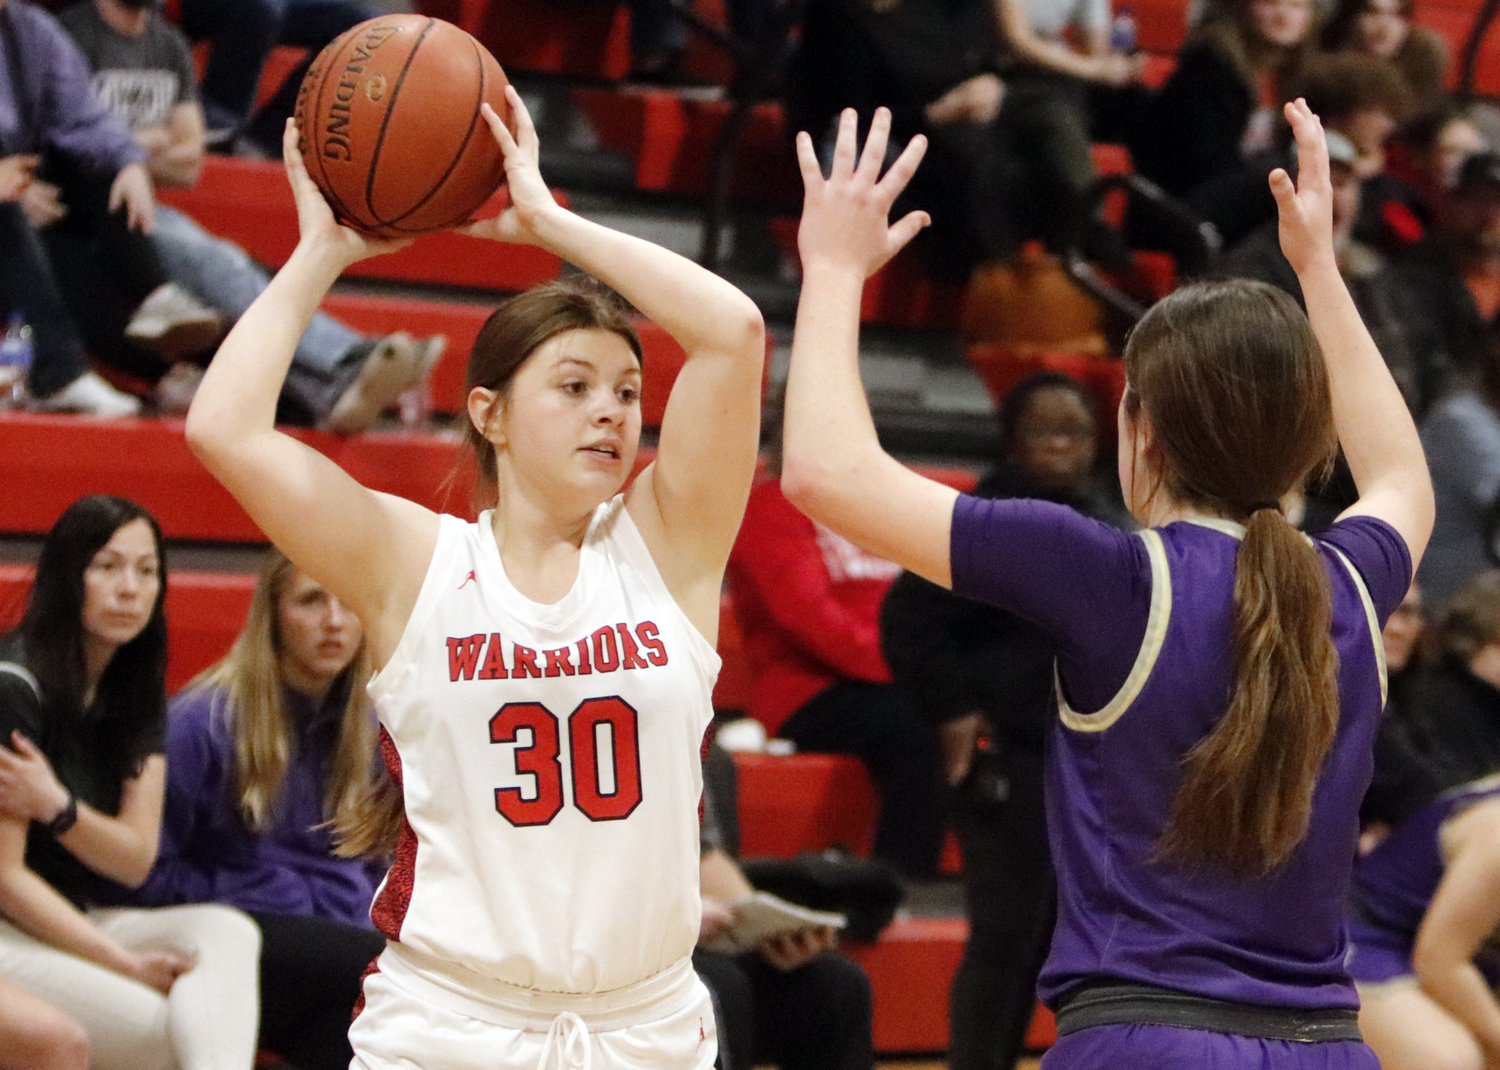 Erin Klassing (left) looks to pass to a teammate during Friday night's win over Hallsville.